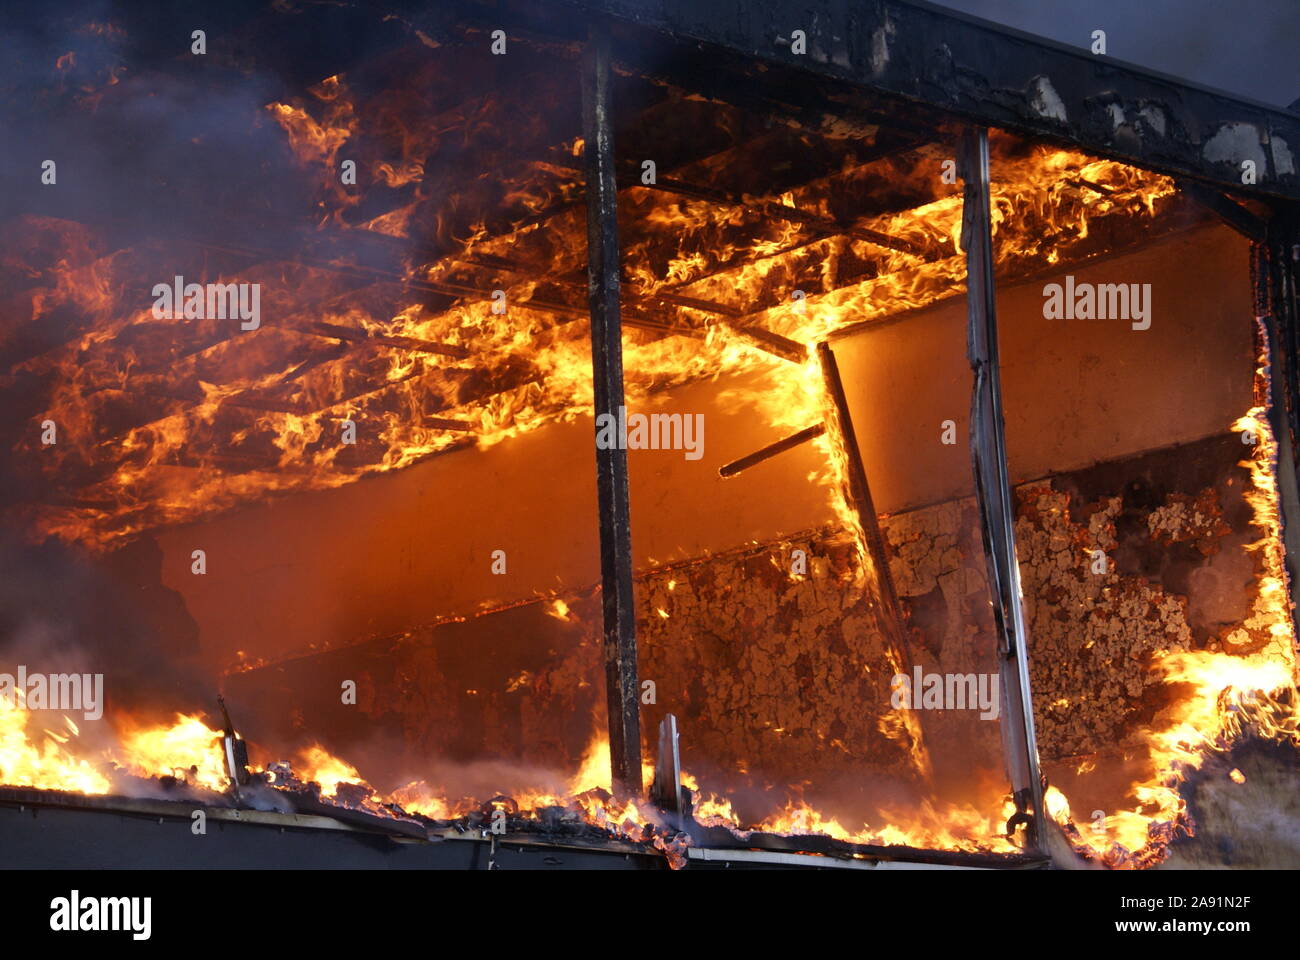 Building, fire flammable external cladding, Combustible cladding Stock Photo